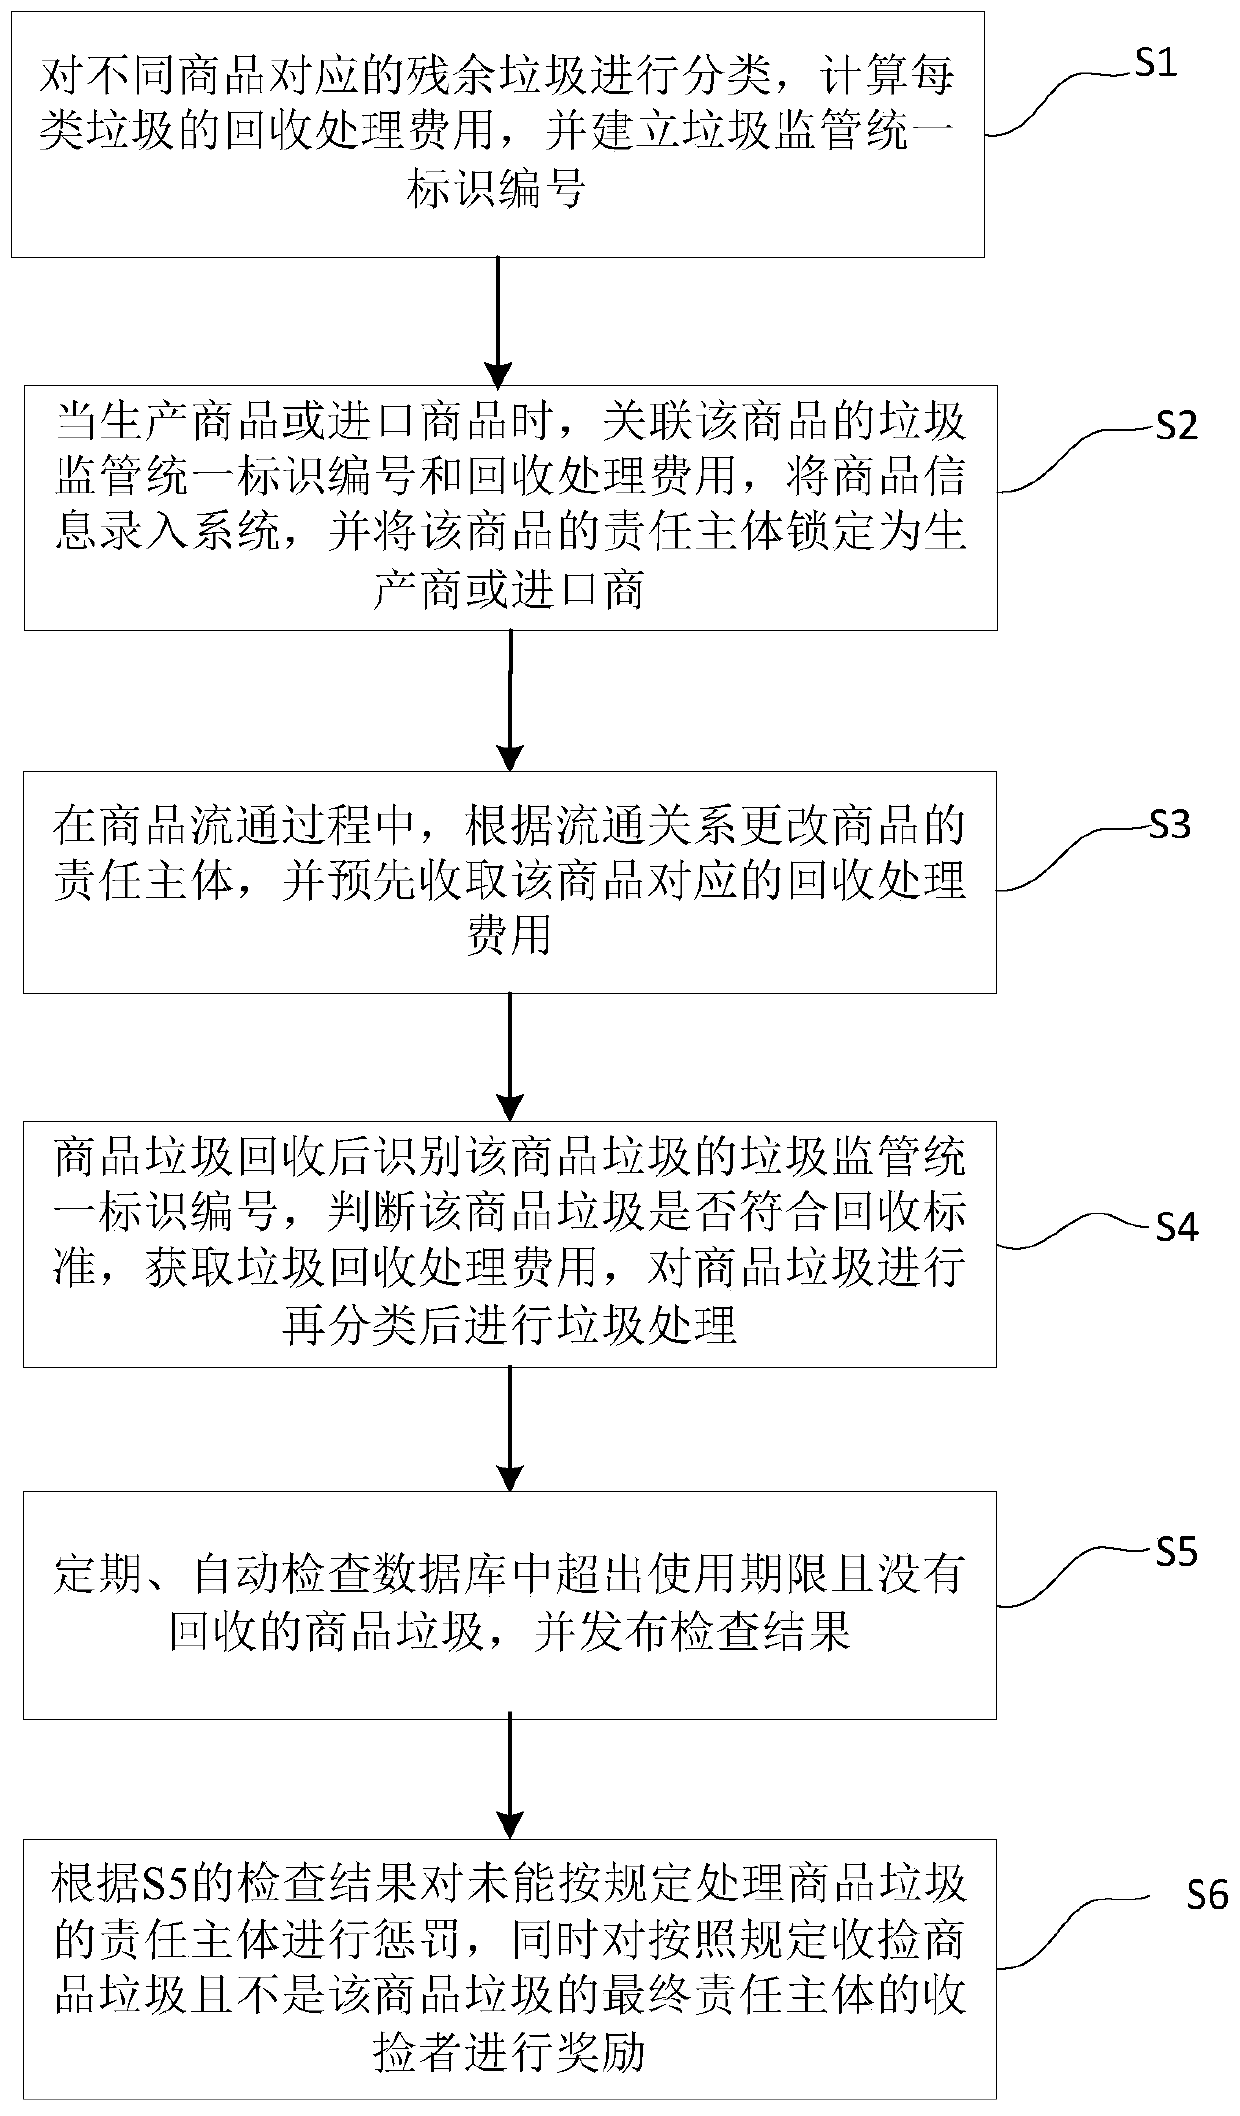 Garbage monitoring and recycling system and method based on object chain technology system